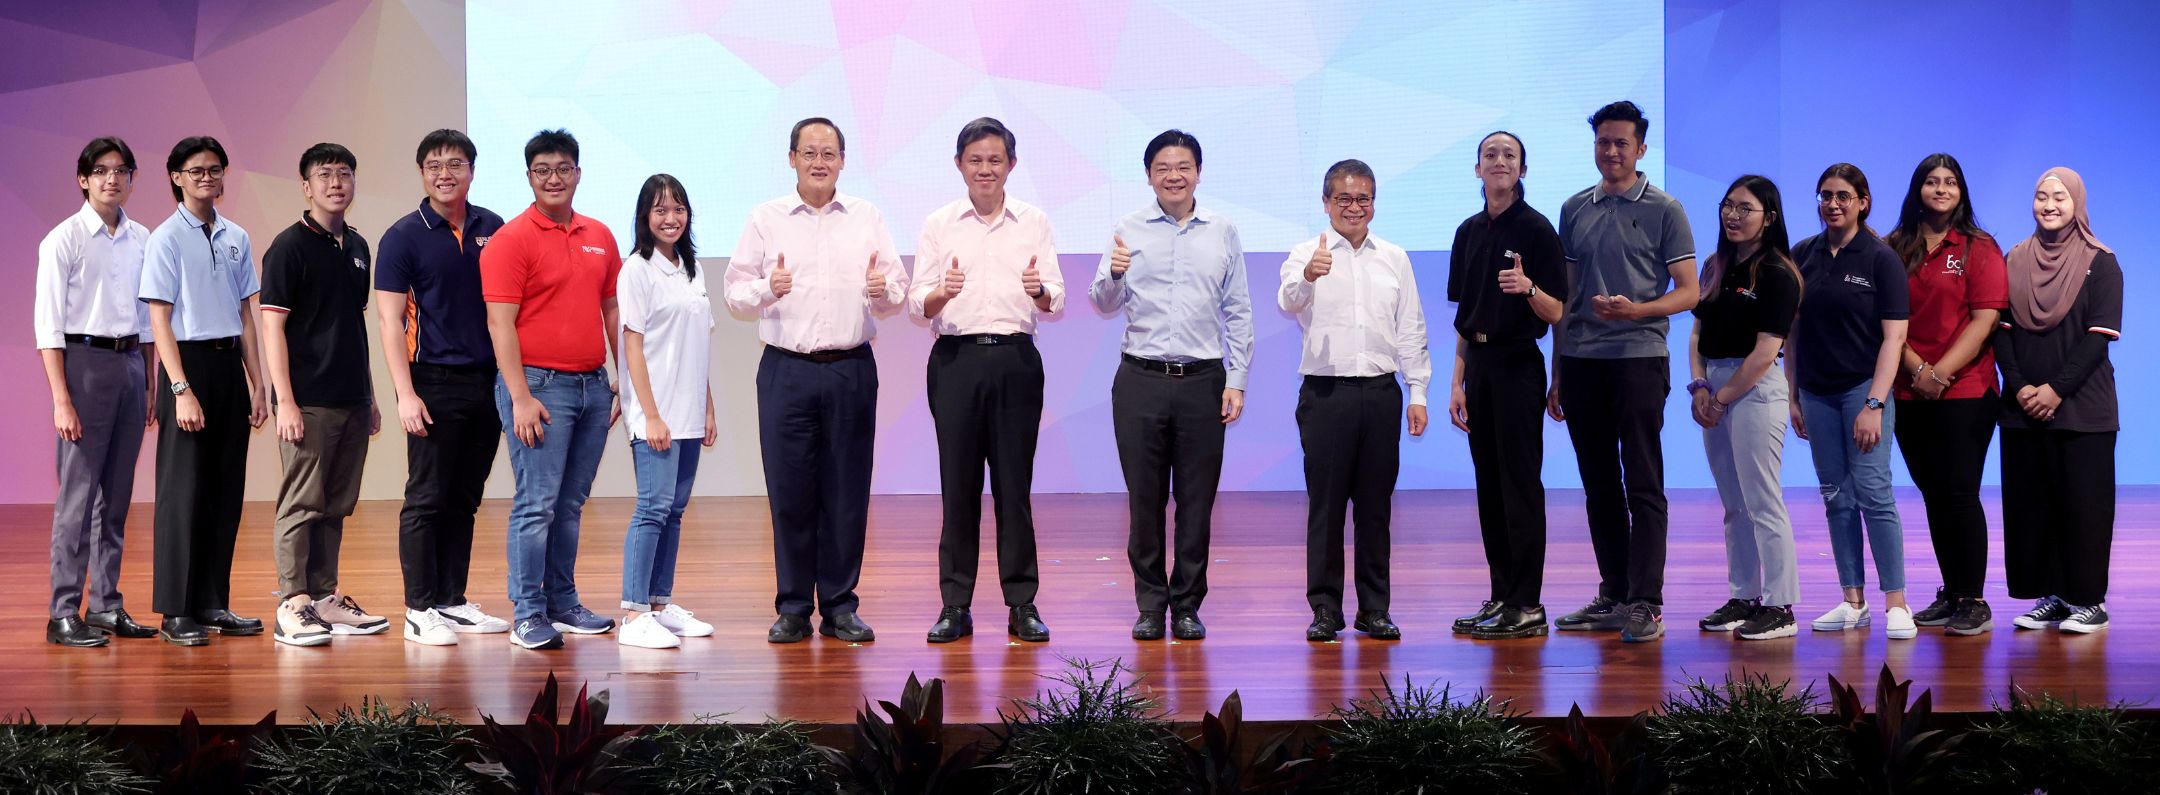 DPM Wong at the Launch of the Lee Kuan Yew Centennial Fund and Singapore Young Leaders ProgrammeHero